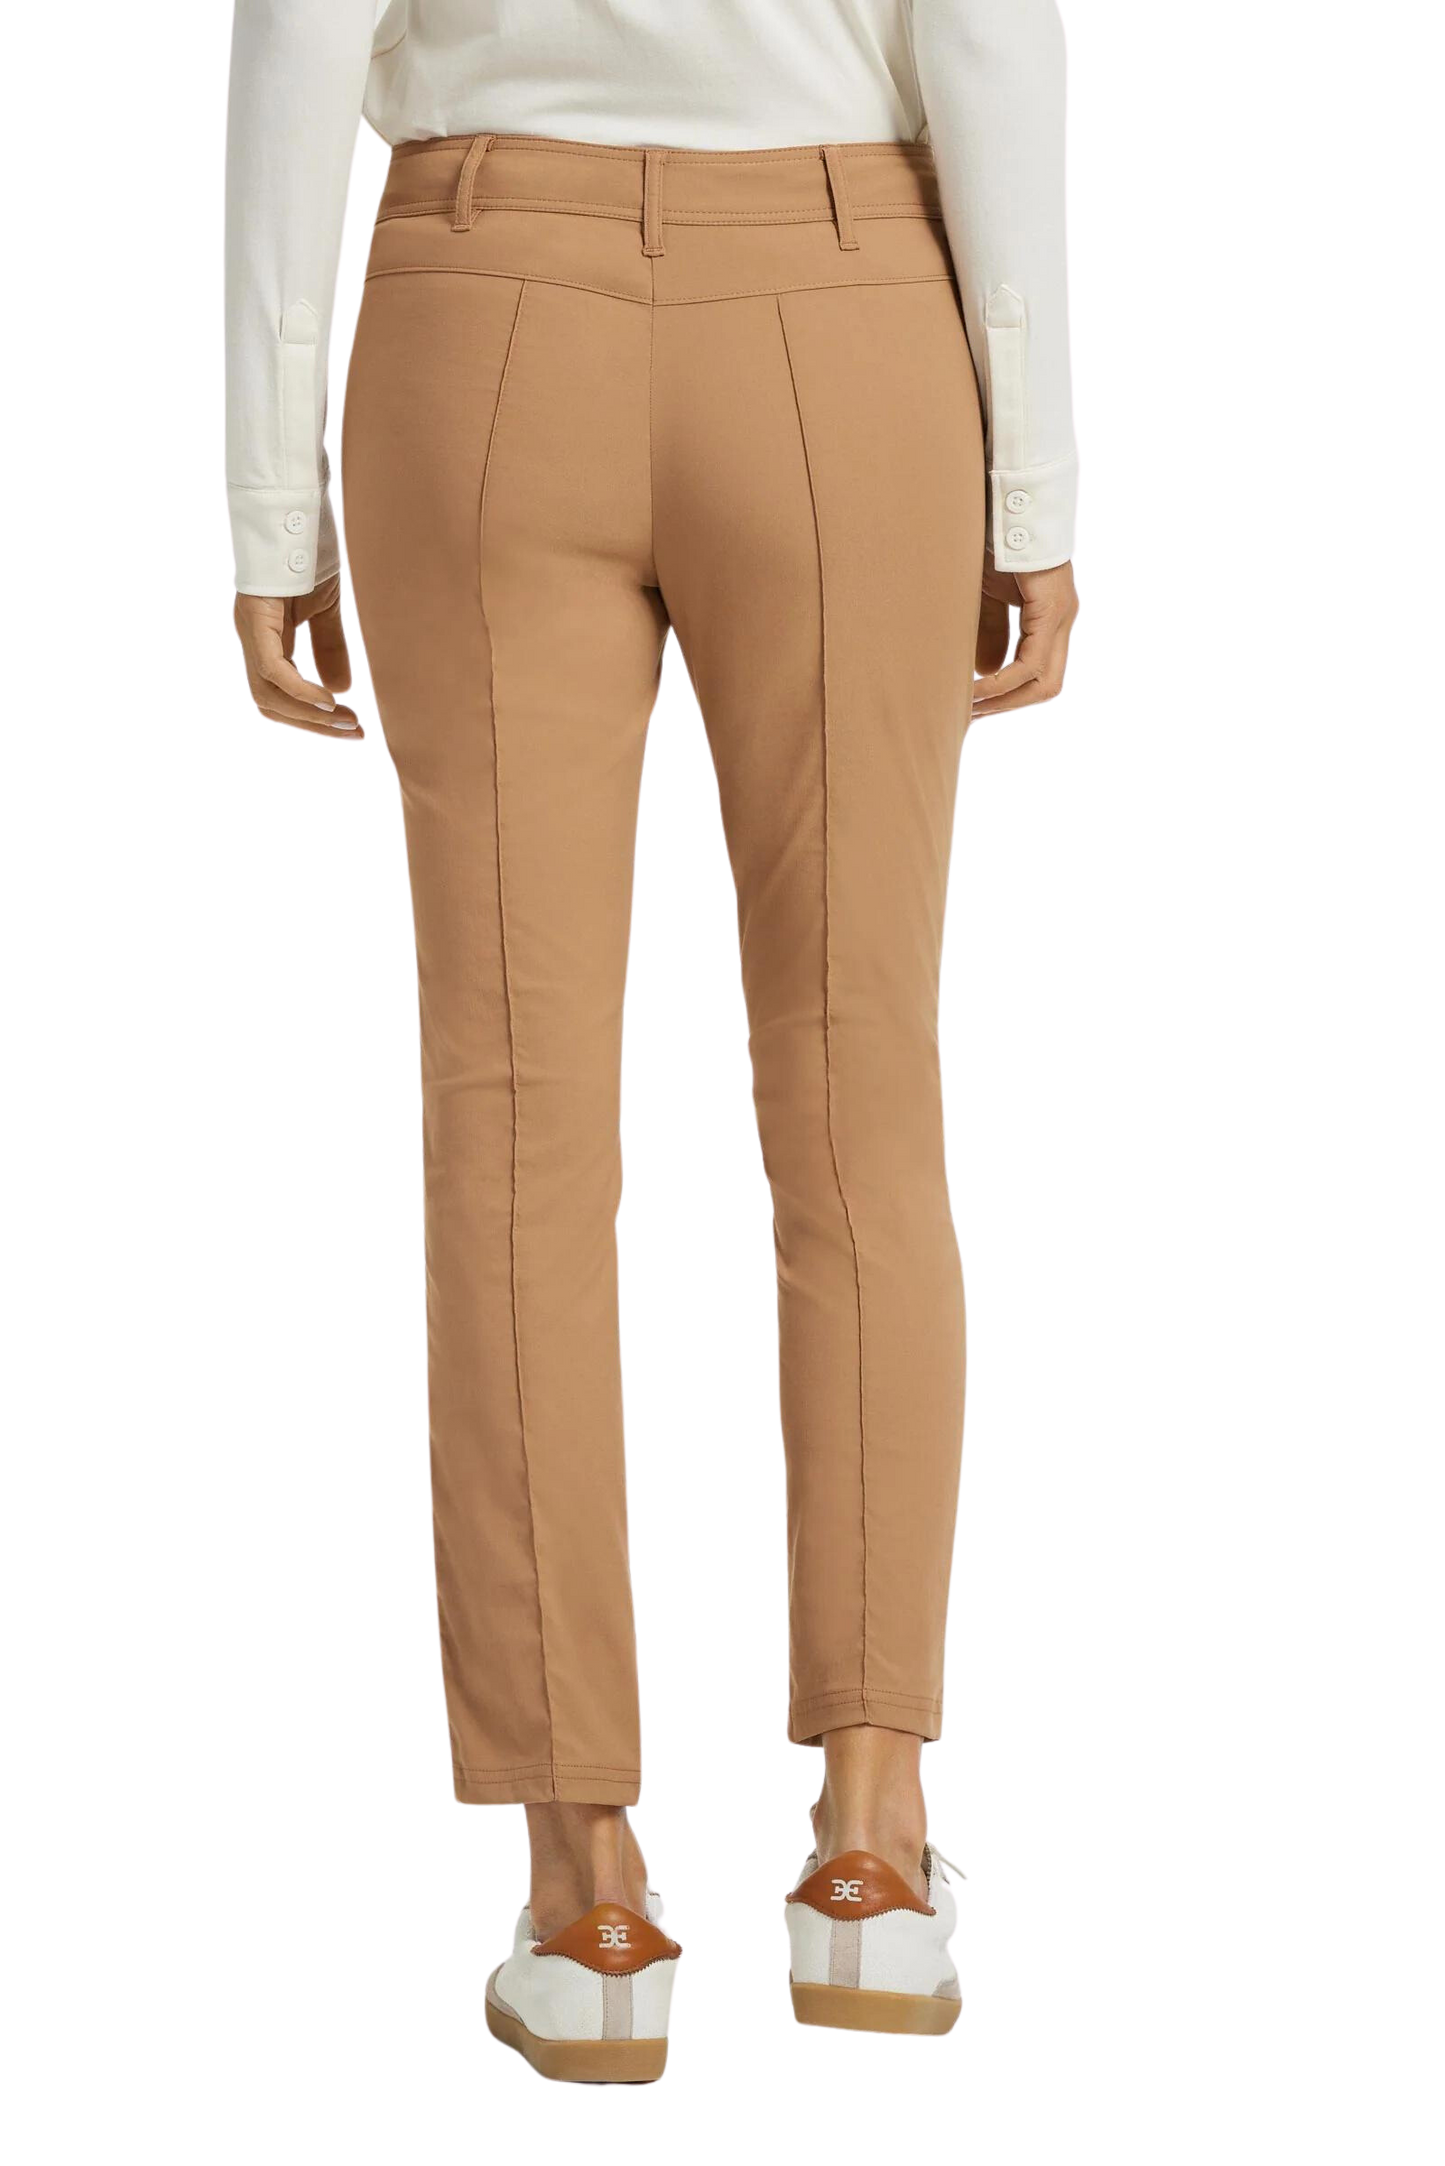 The Peggy Zippered Pant